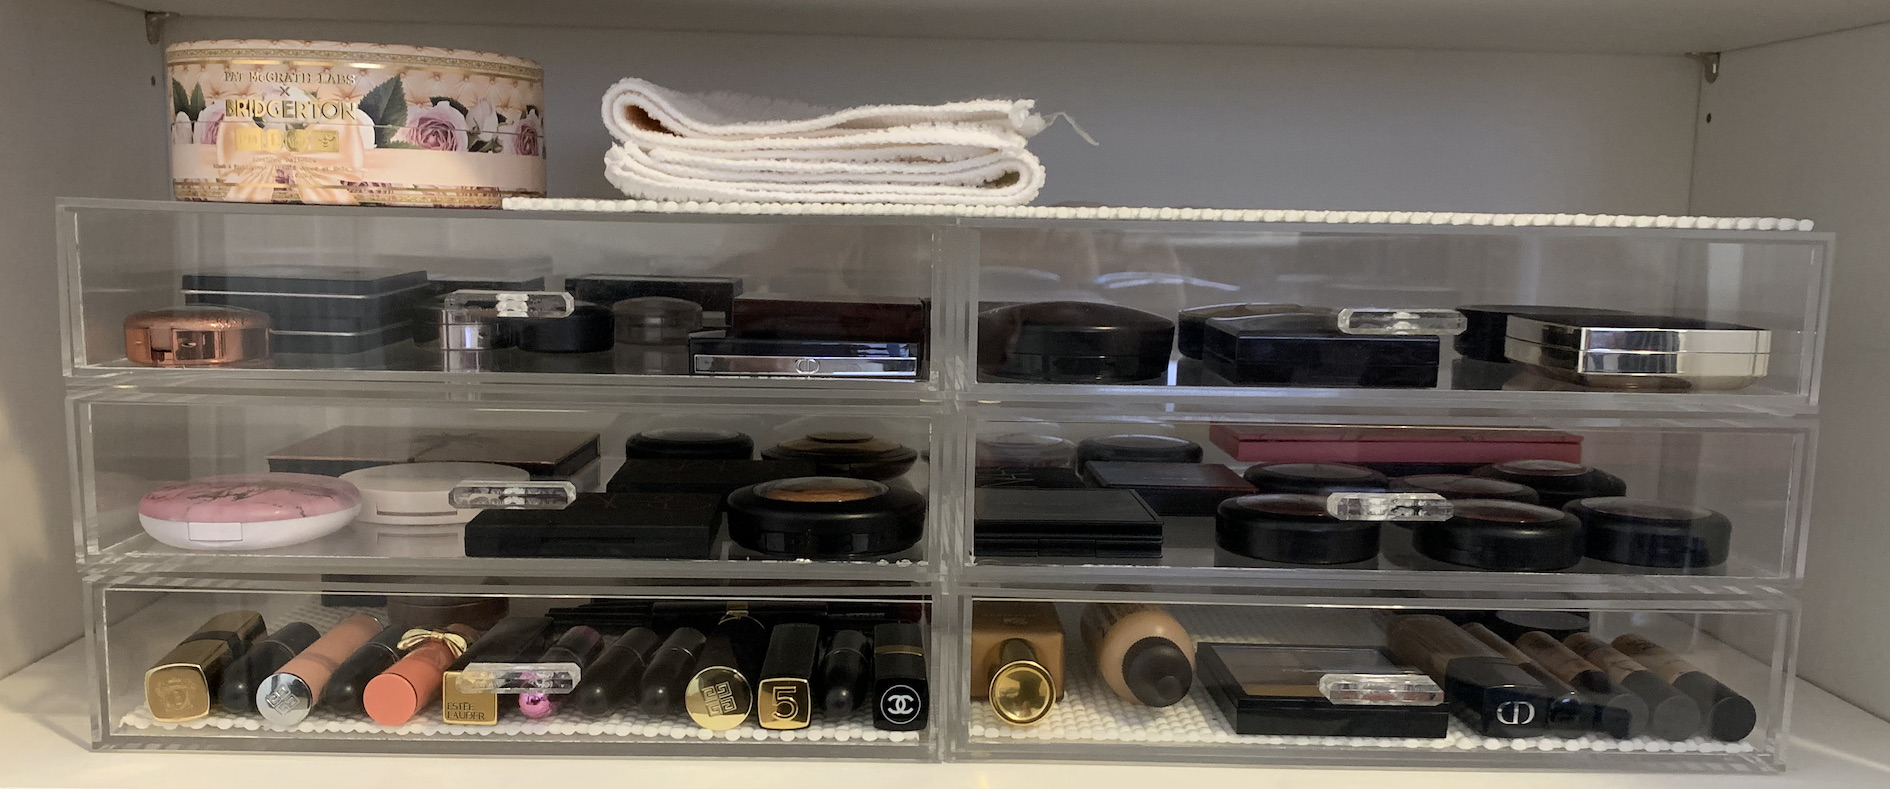 https://nikkifromhr.files.wordpress.com/2022/07/makeup-collection-organization-storage-the-container-store-landscape-acrylic-paper-drawer-review.jpeg